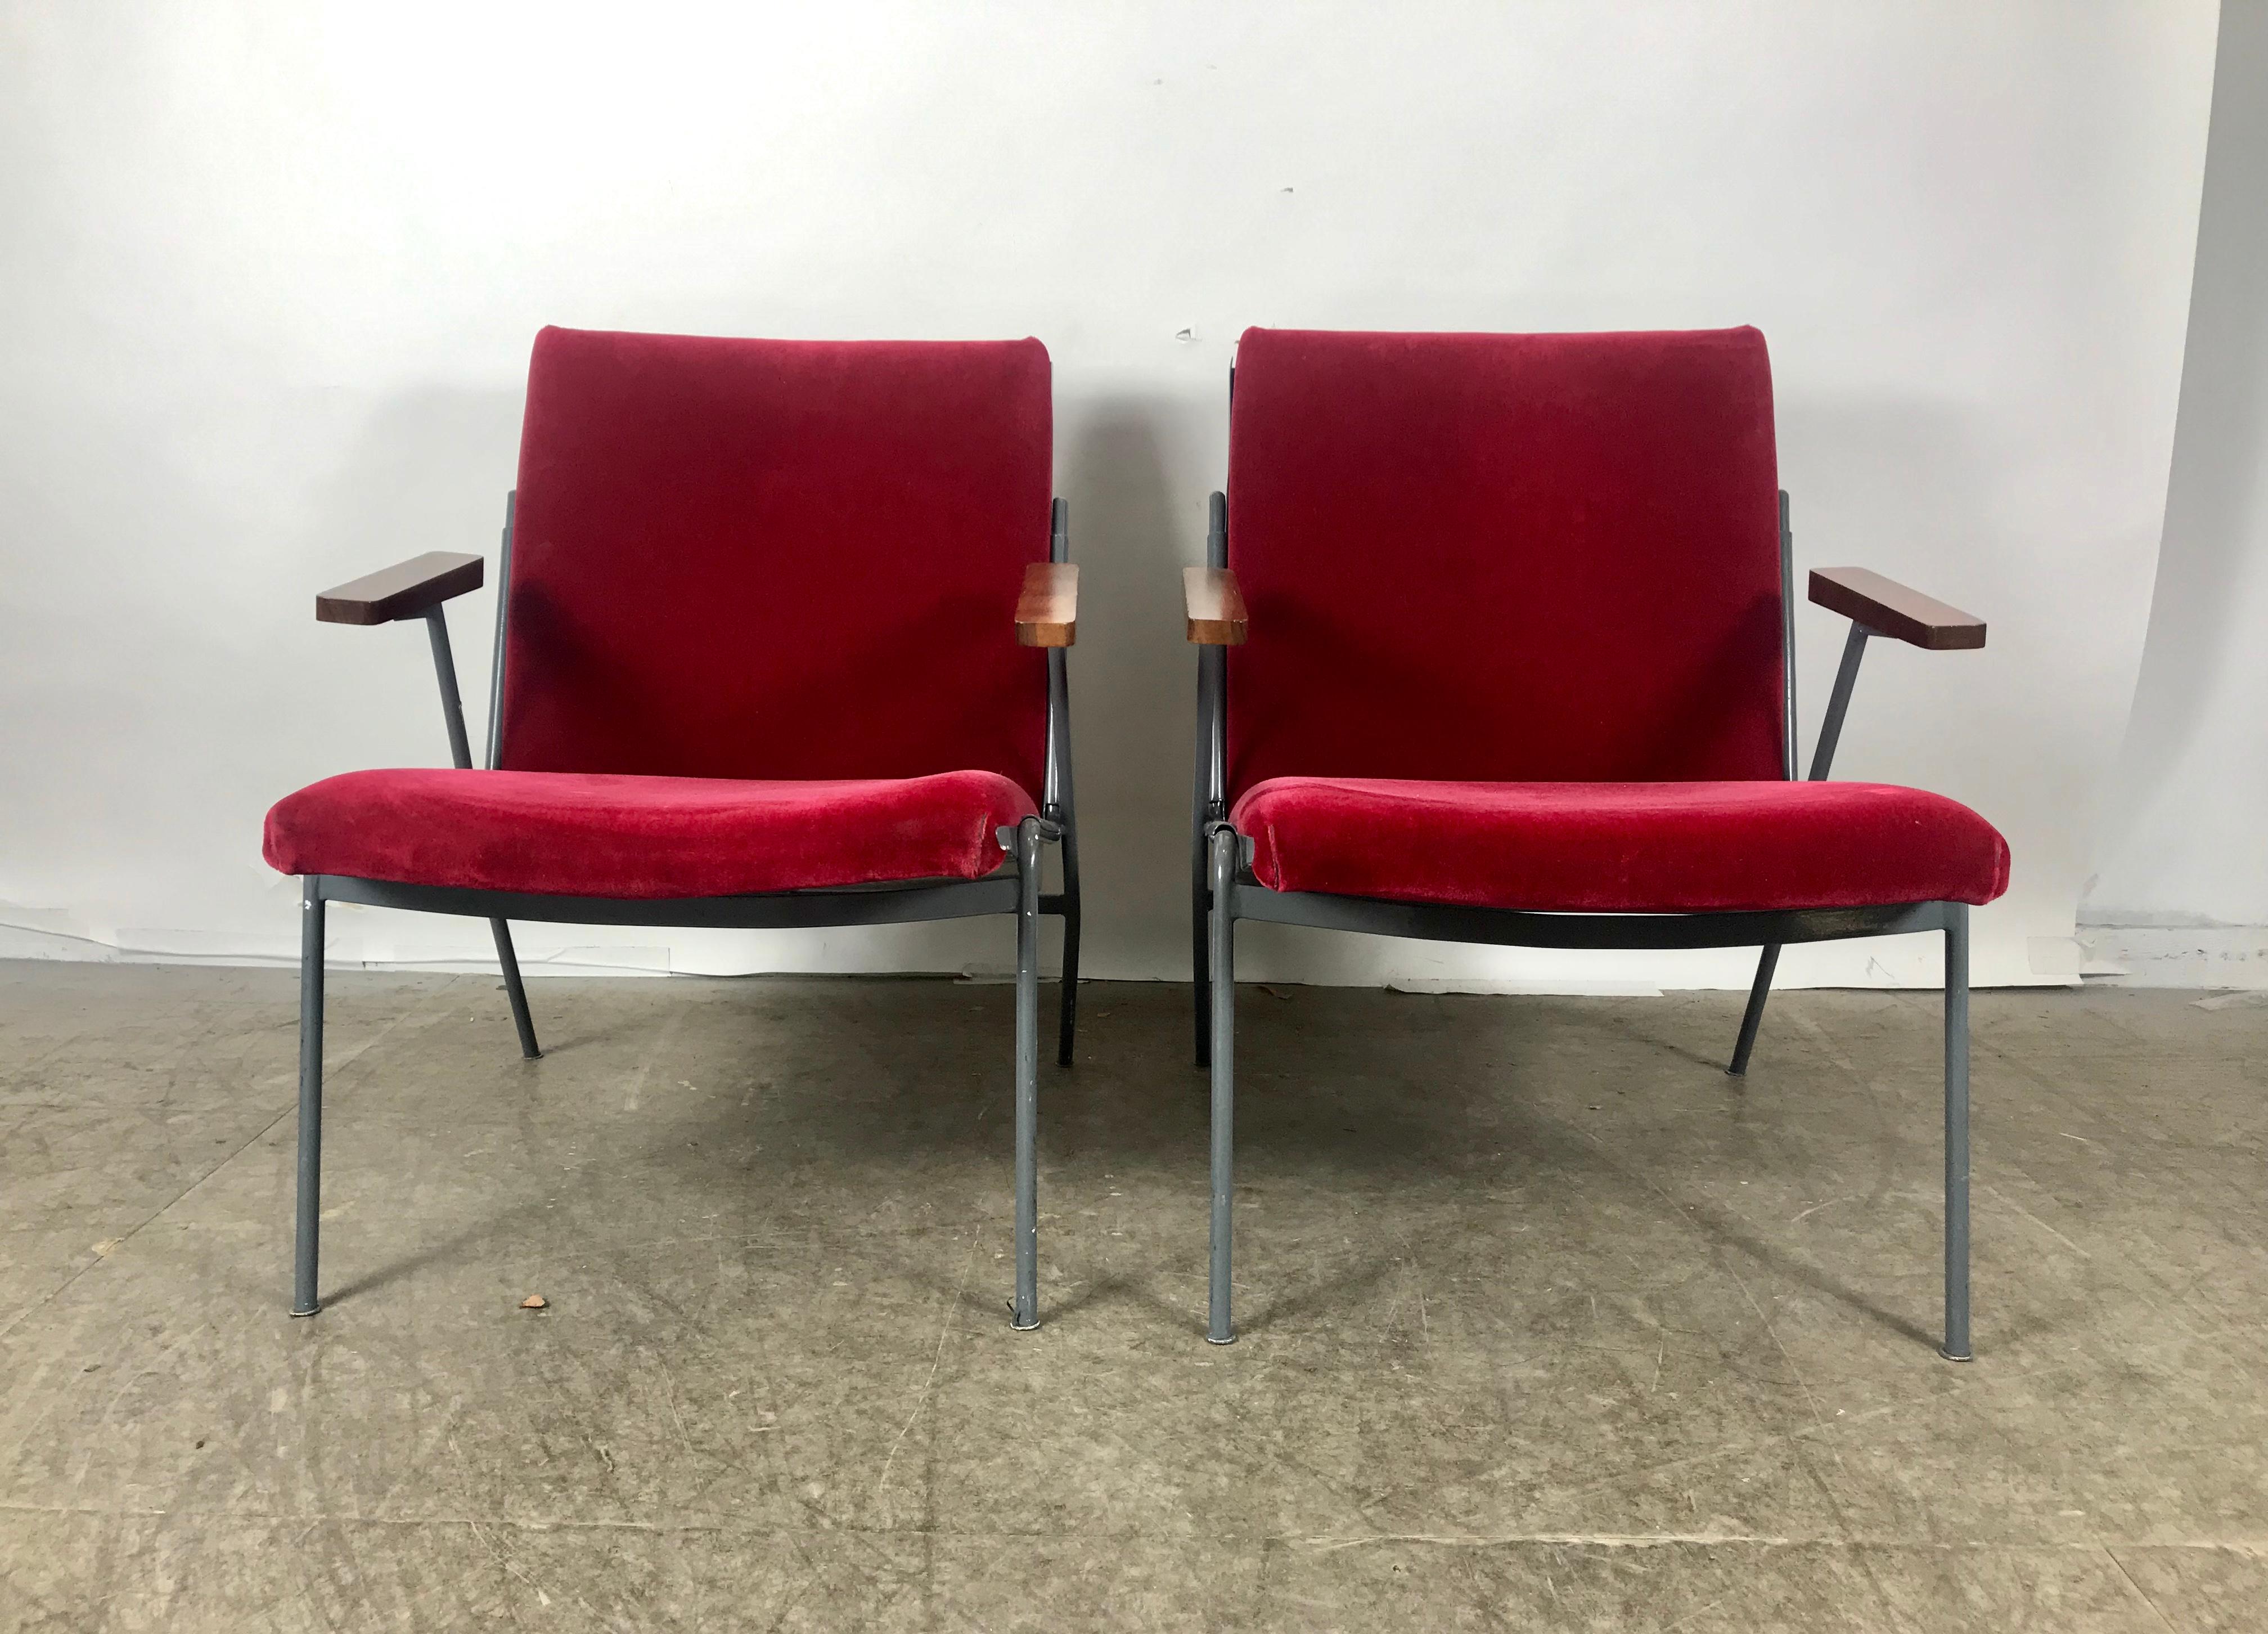 Elegance meets industrial. Pair of lounge chairs, metal frames, walnut arm rests and stunning red mohair seat and back. Extremely comfortable, superior quality and construction, amazing style and design, imported from France, appear to be made in